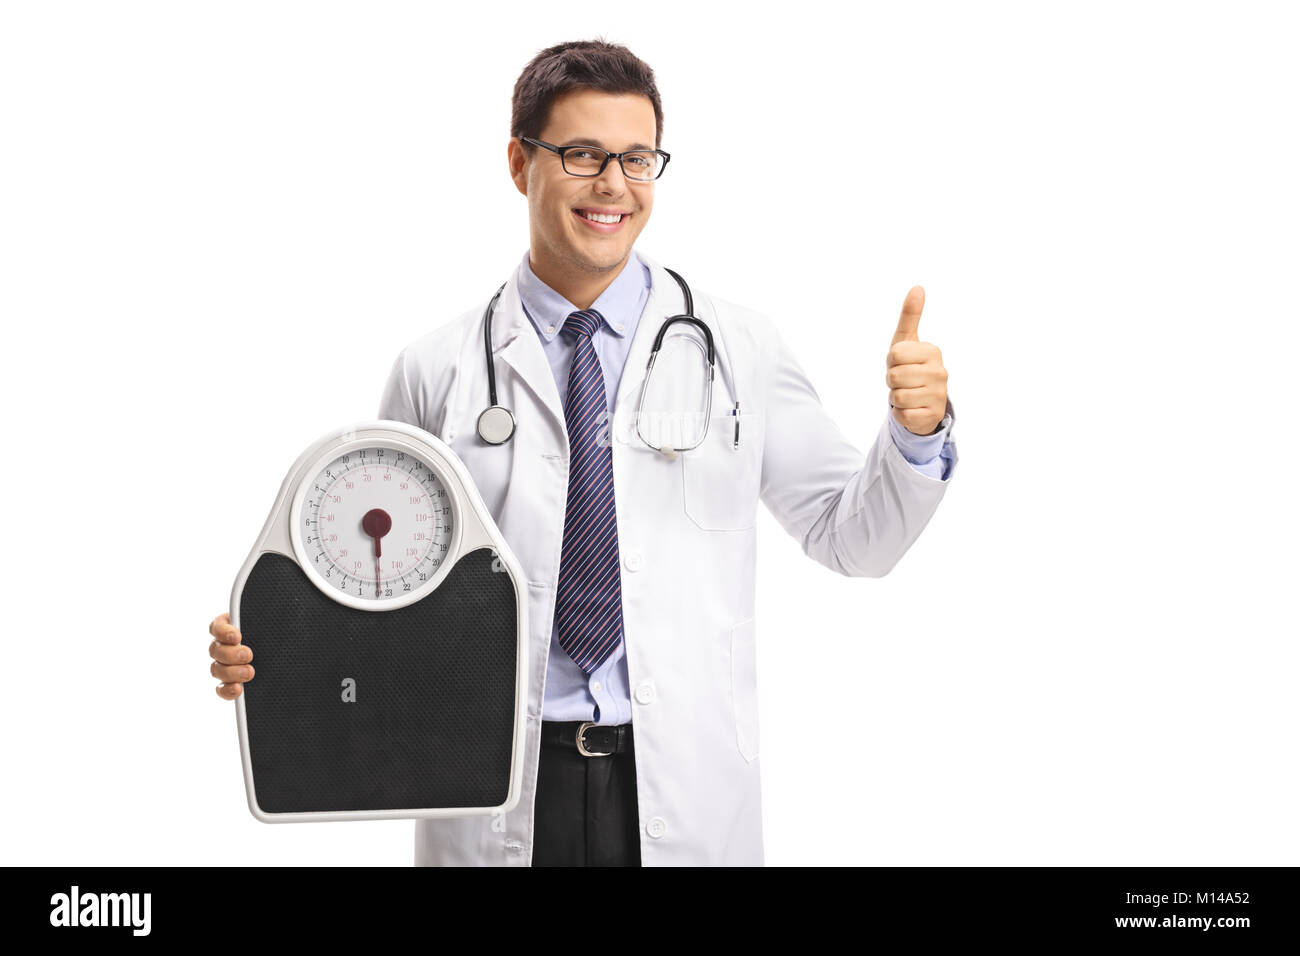 Doctor holding a weight scale and making a thumb up gesture isolated on white background Stock Photo